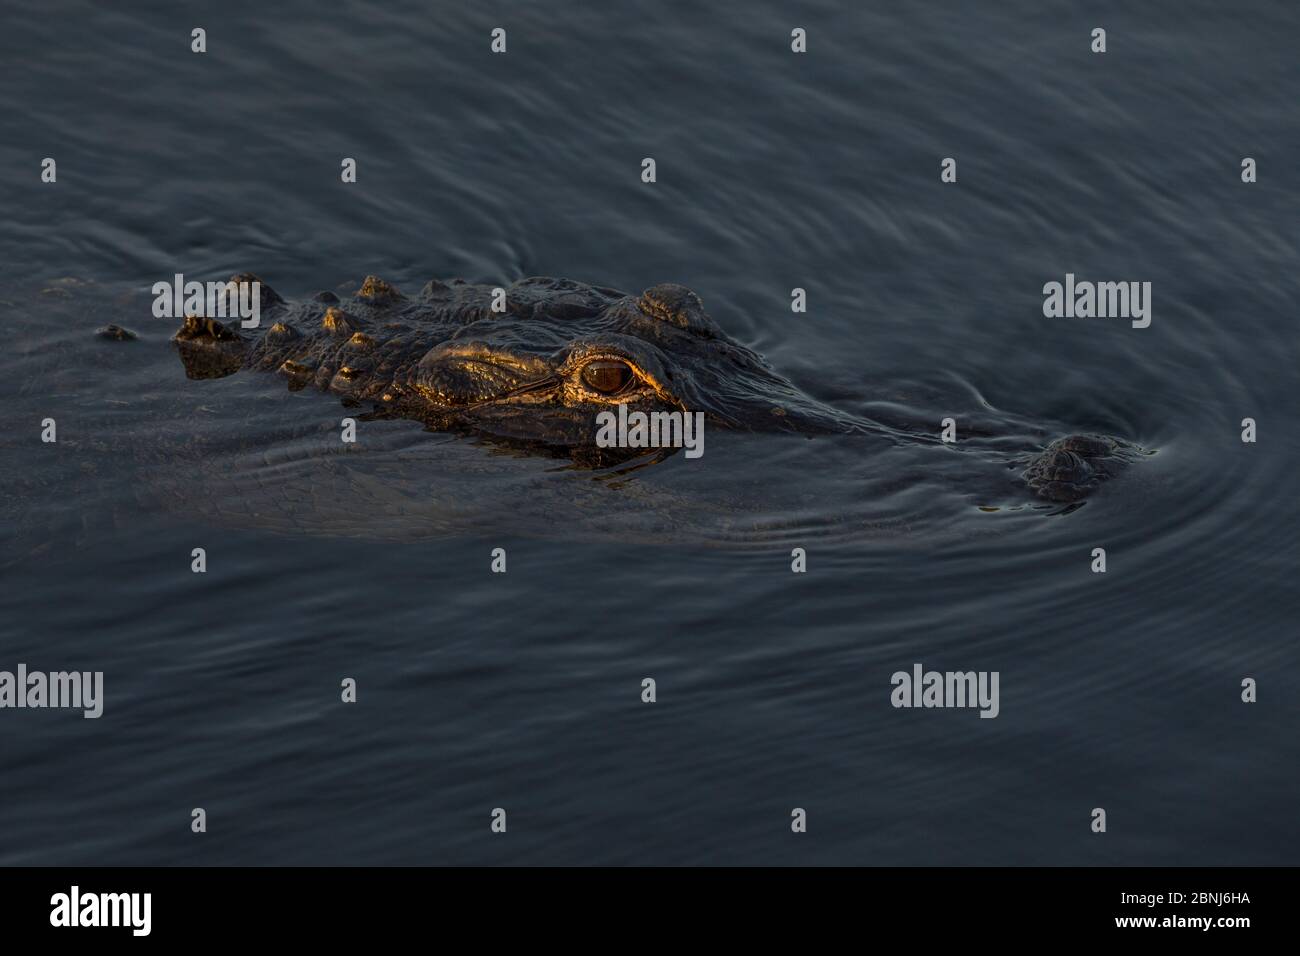 American alligator (Alligator mississippiensis) in water, high angle view. Everglades, USA, January. Stock Photo